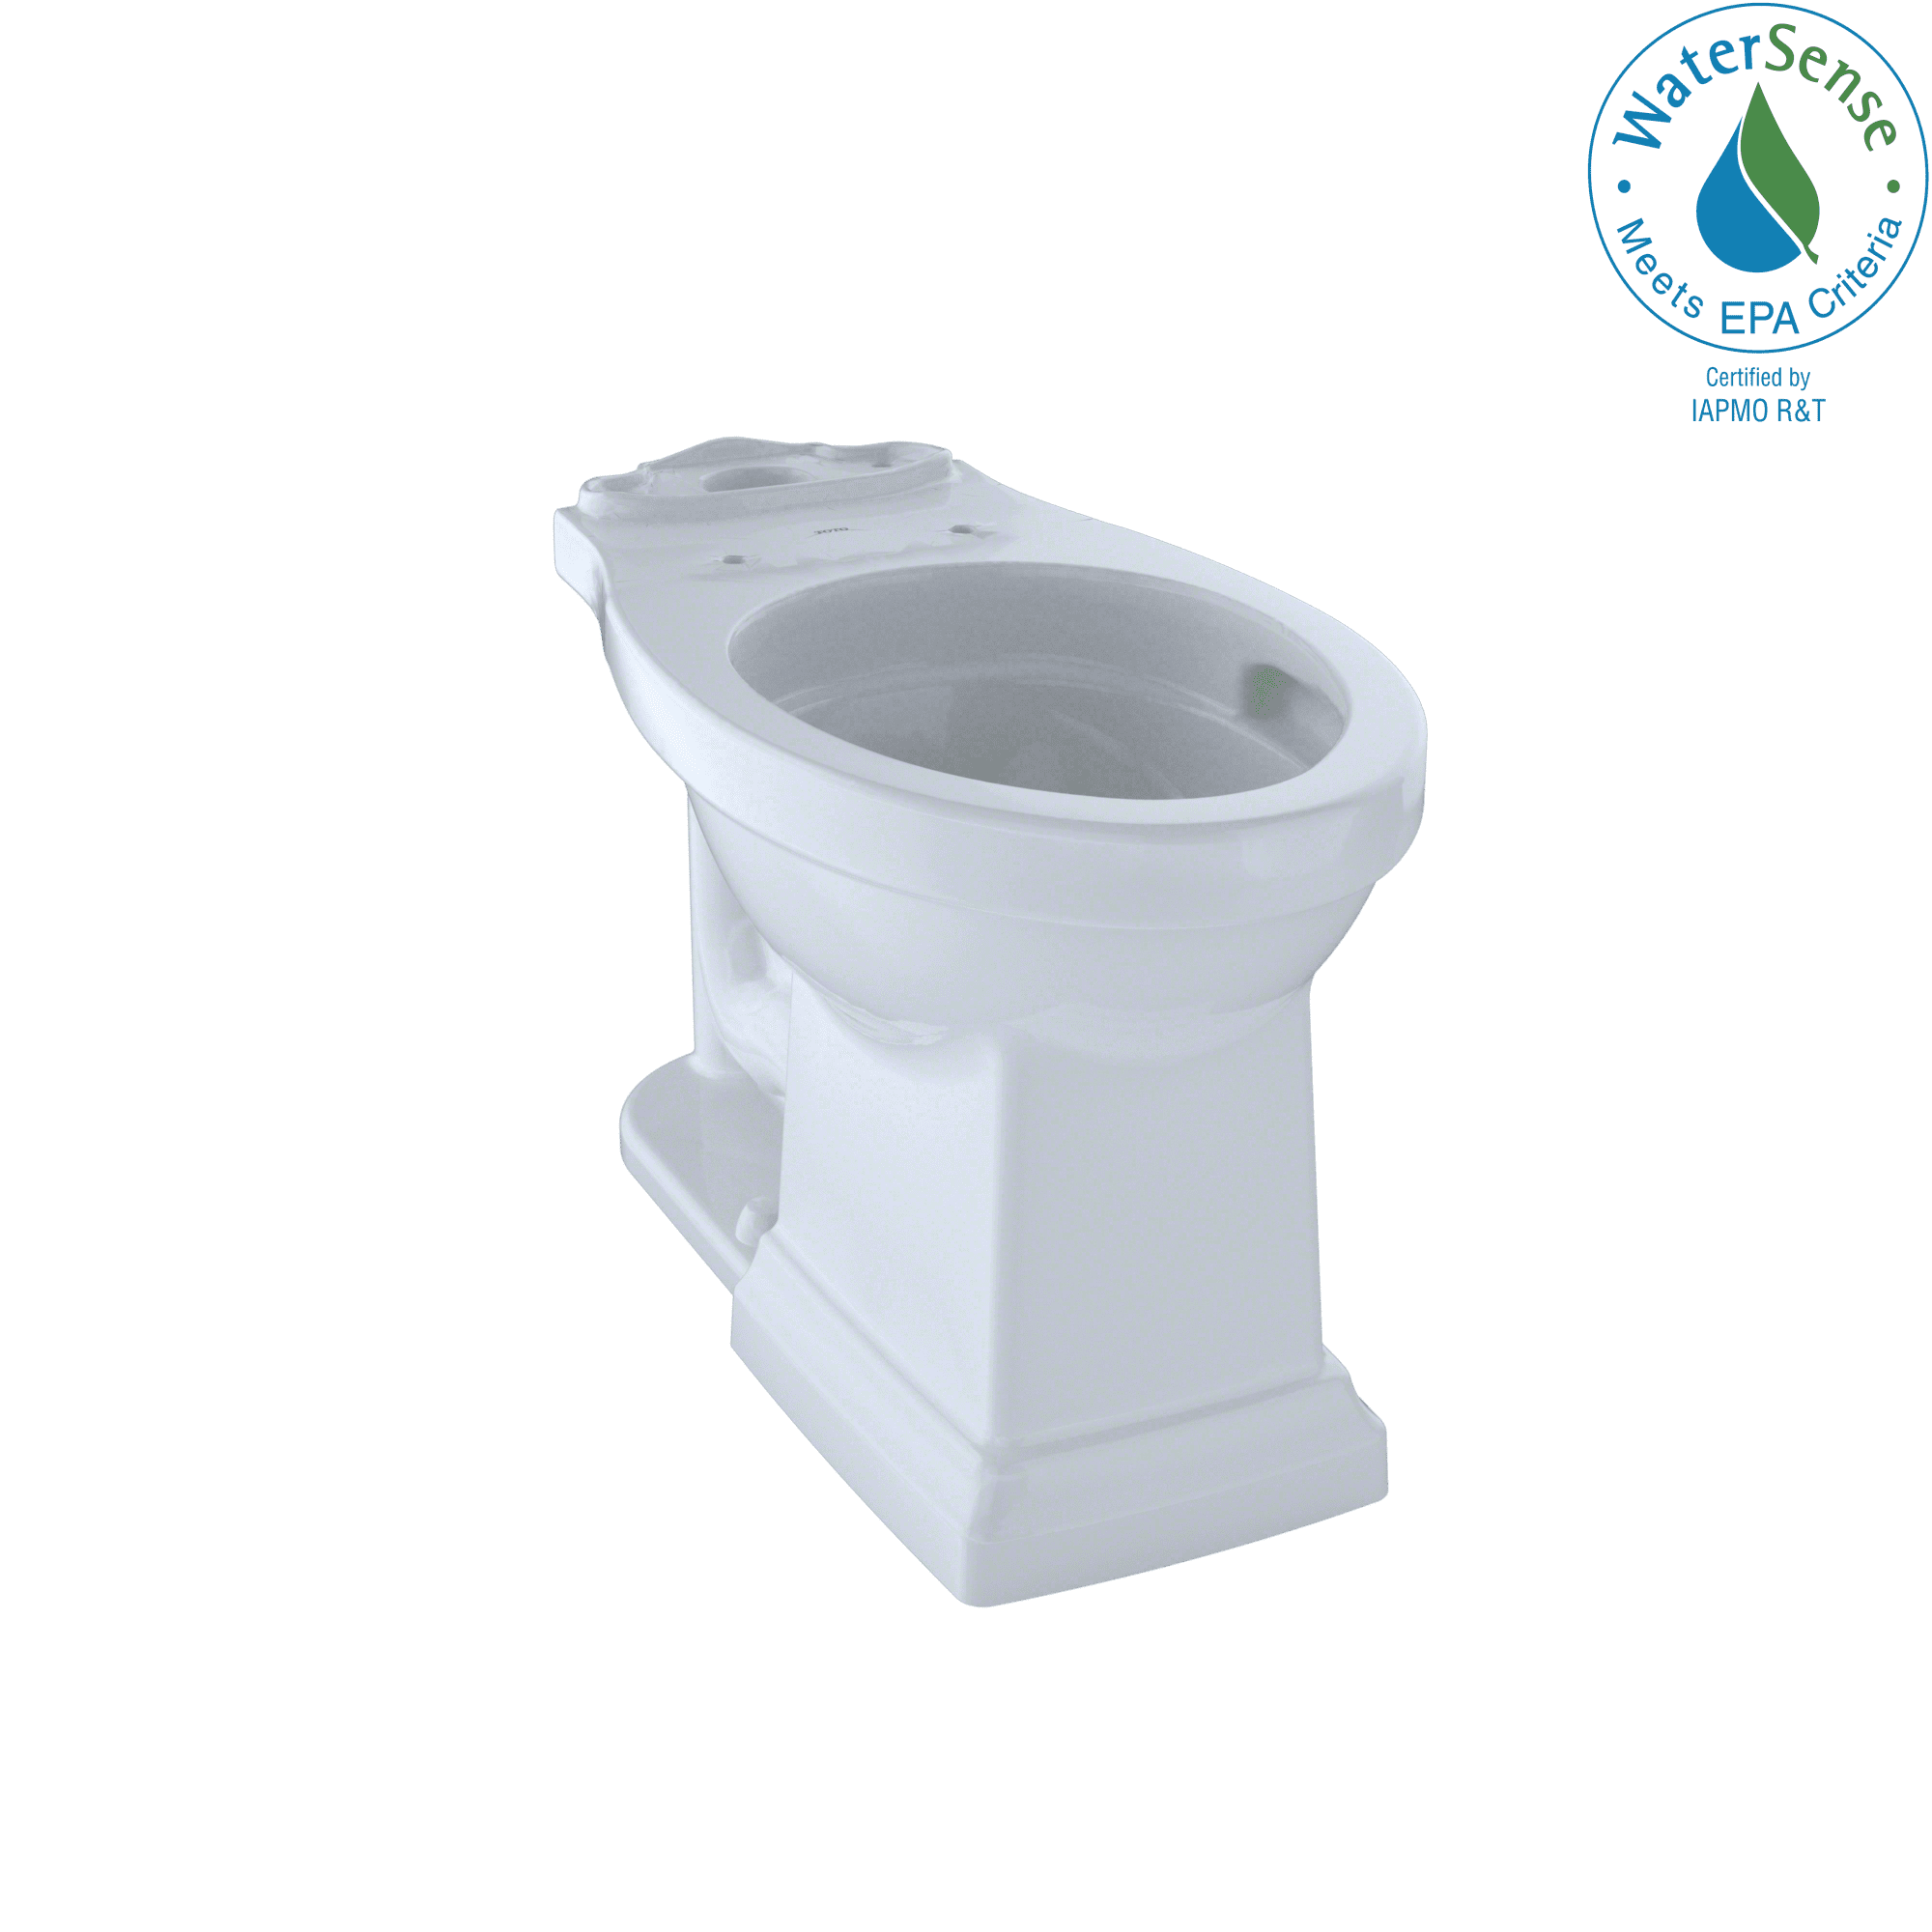 Universal Height Toilet Bowl With Cefiontect, Cotton White